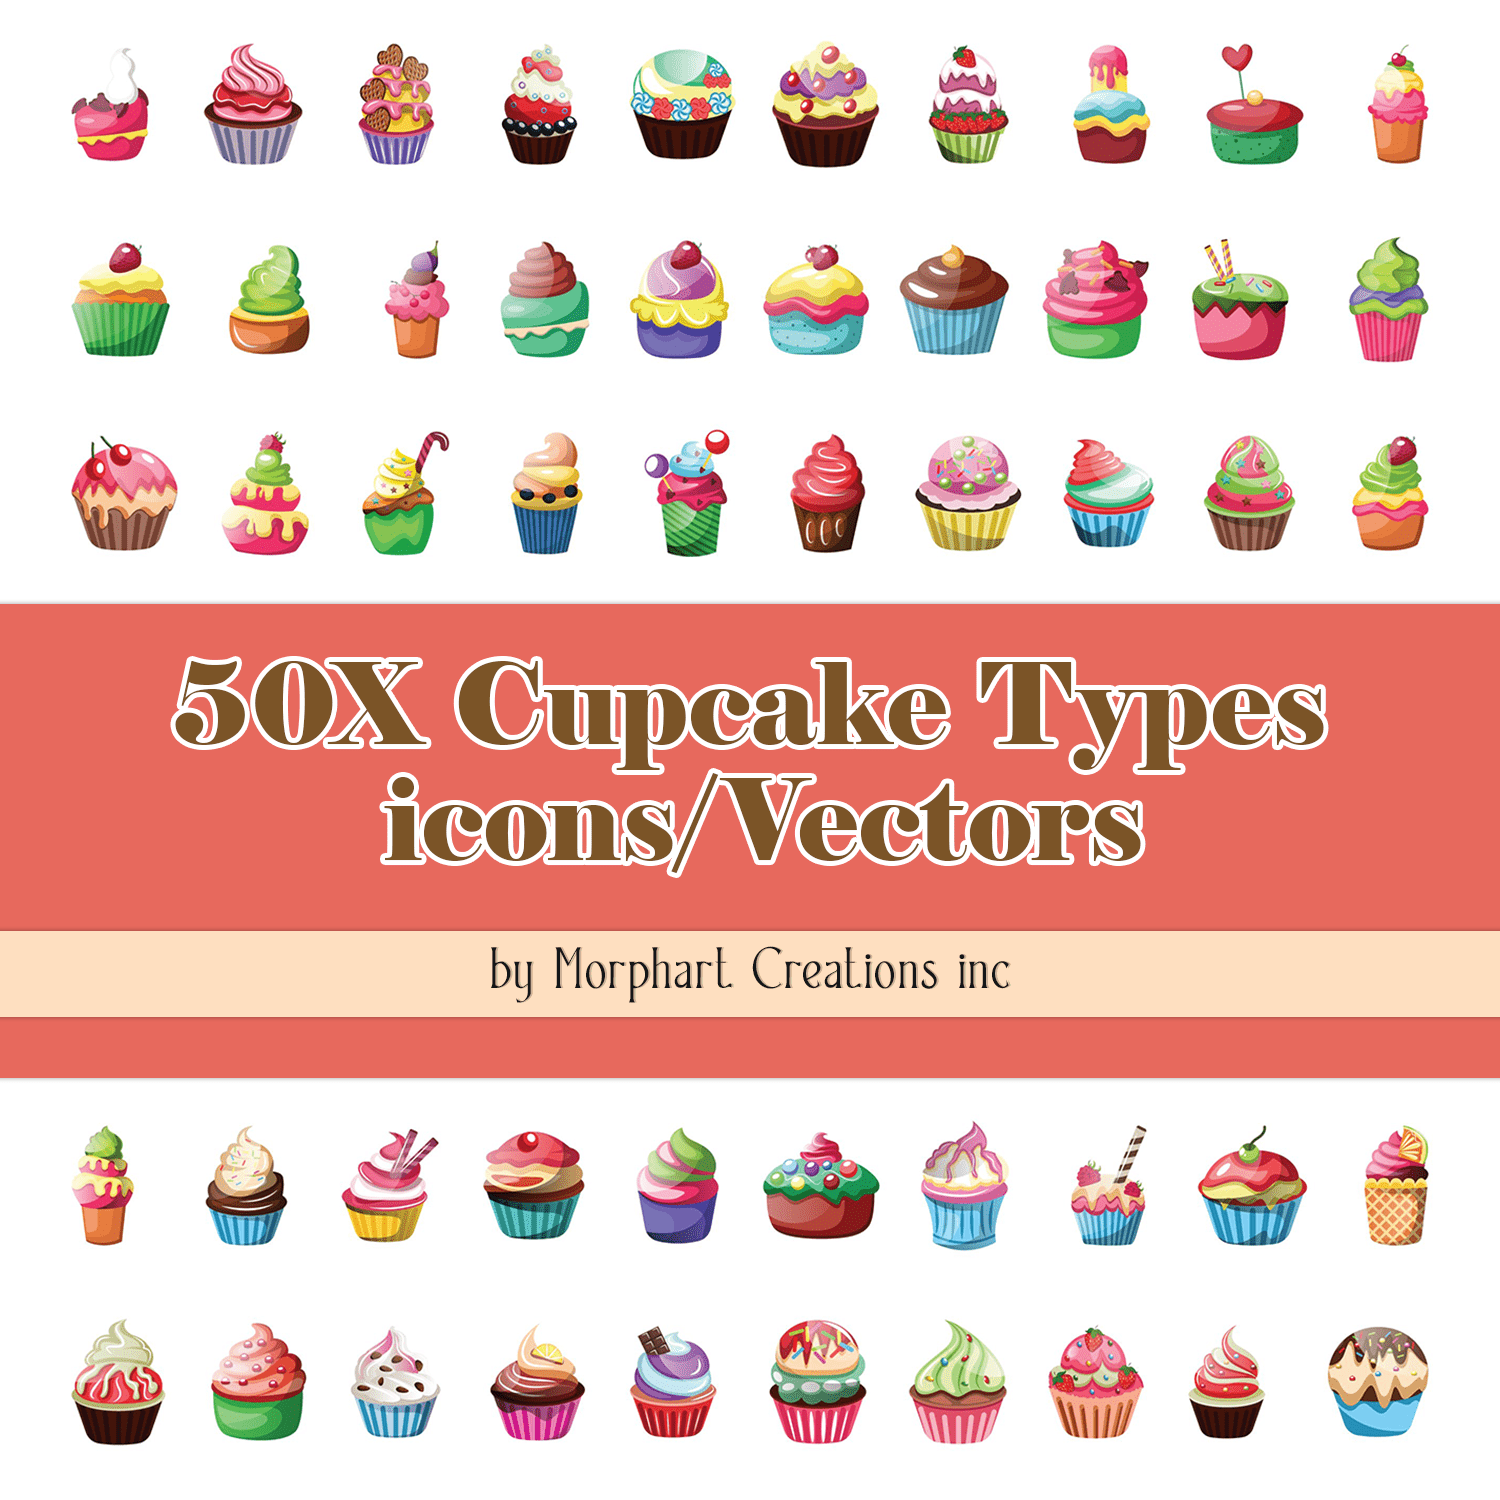 Preview 50x cupcake types iconsvectors.